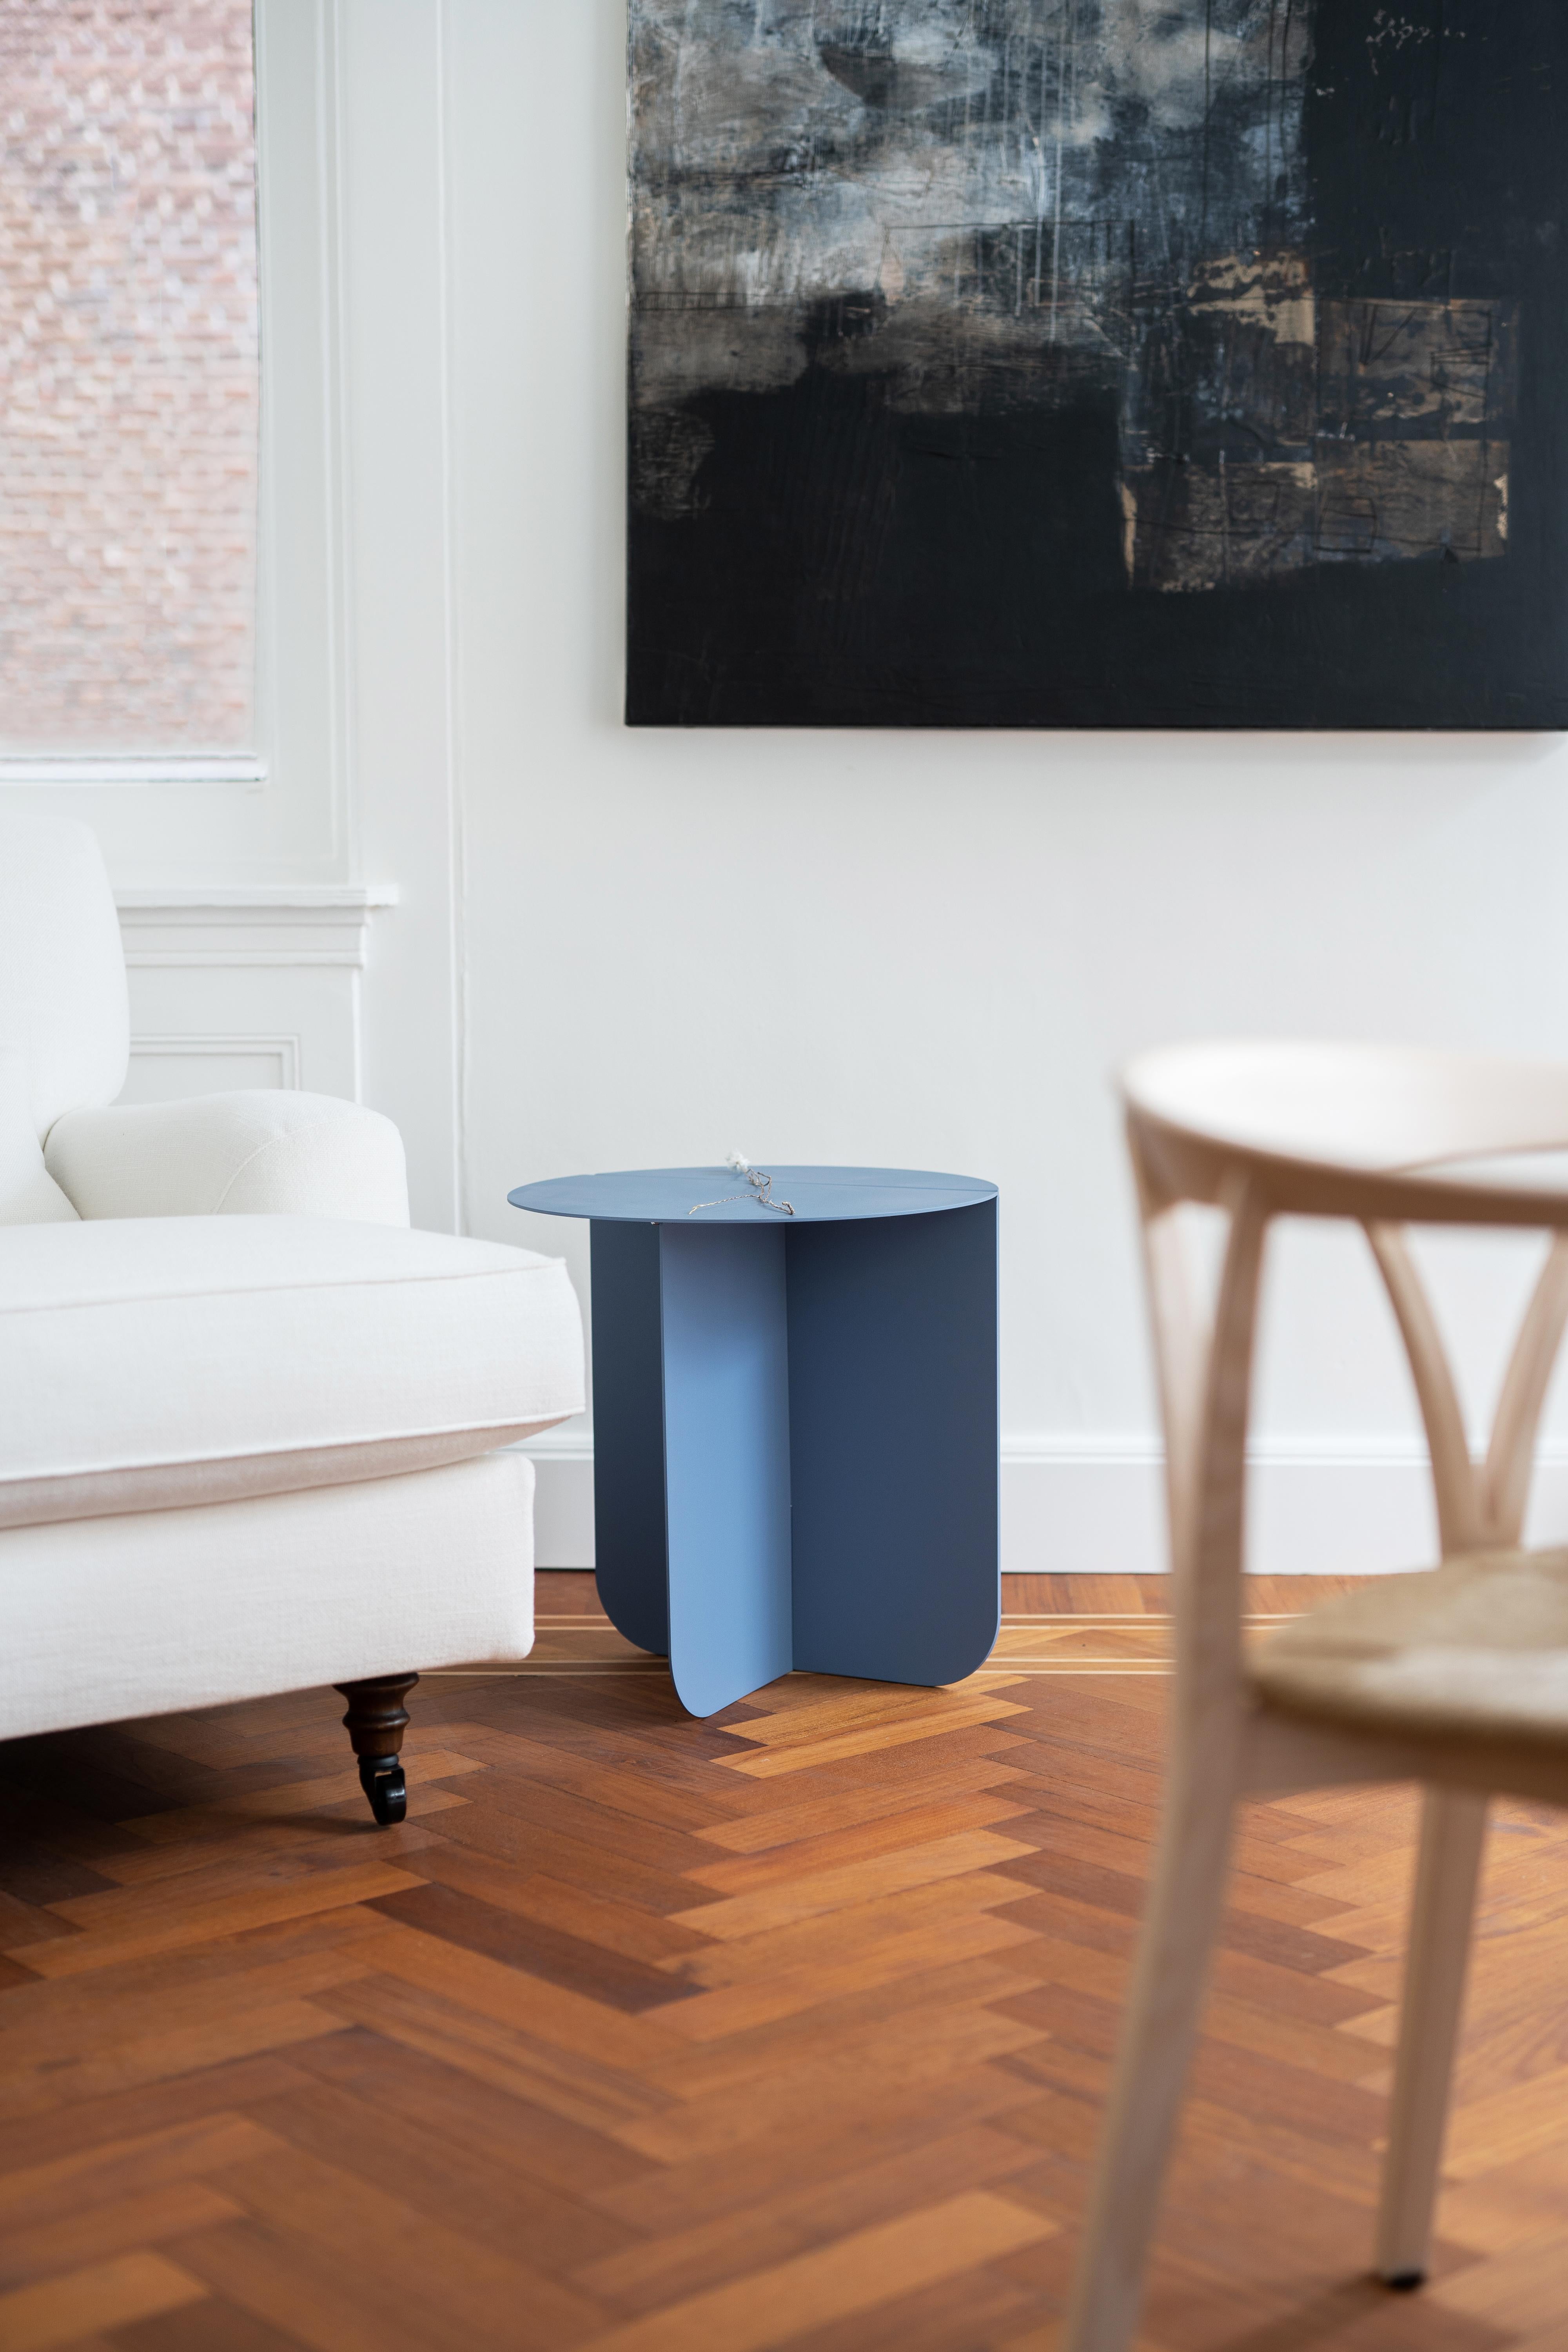 Powder-Coated Colour, a Modern Coffee / Side Table, RAL 1001 - Beige, by BAS VELLEKOOP For Sale